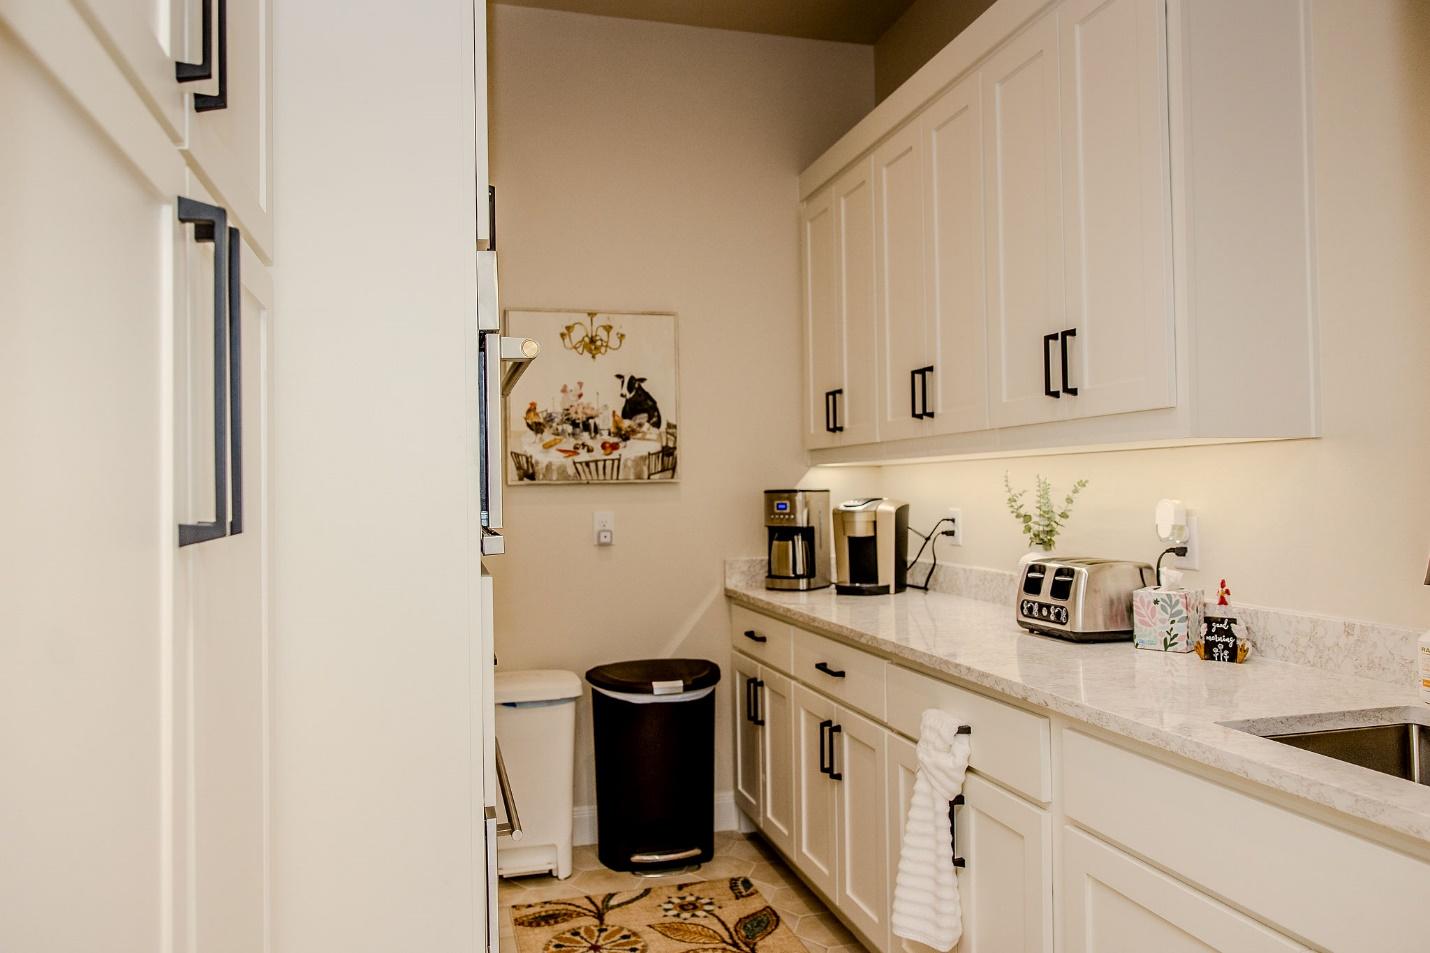 A kitchen with white cabinets and appliances

Description automatically generated